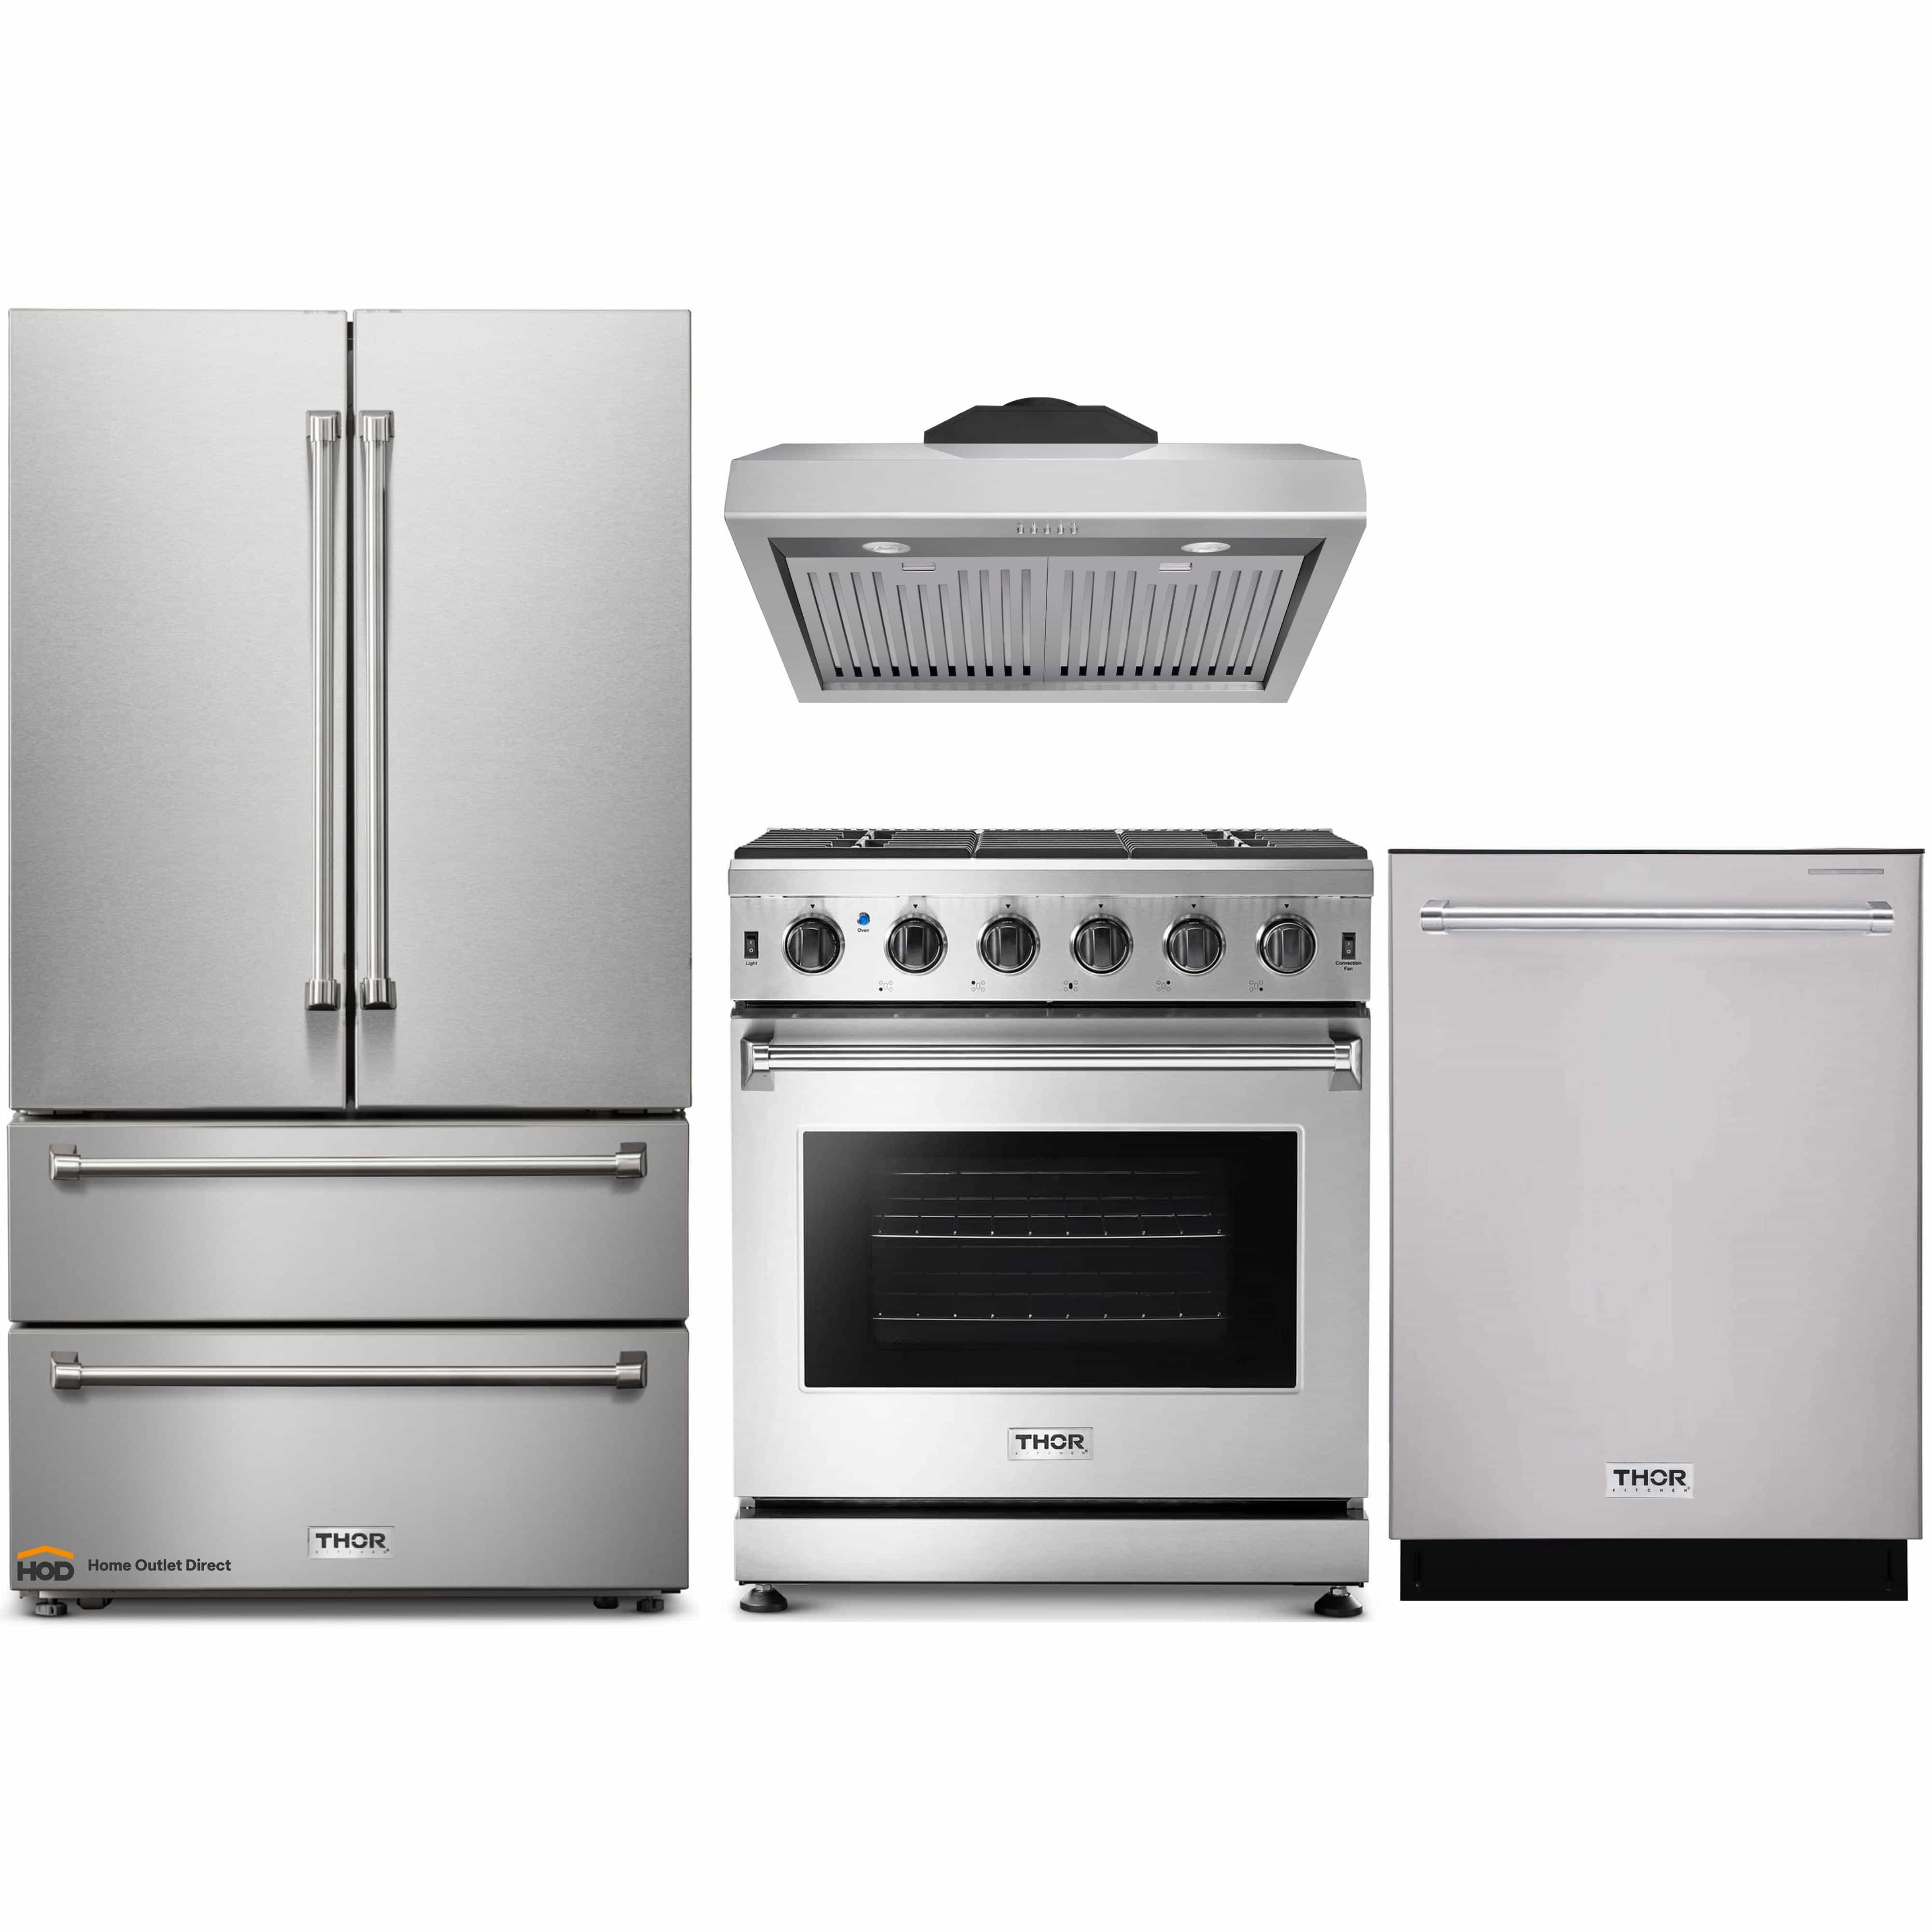 Thor Kitchen A4-Piece Appliance Package - 30-Inch Gas Range, French Door Refrigerator, Under Cabinet Hood and Dishwasher in Stainless Steel